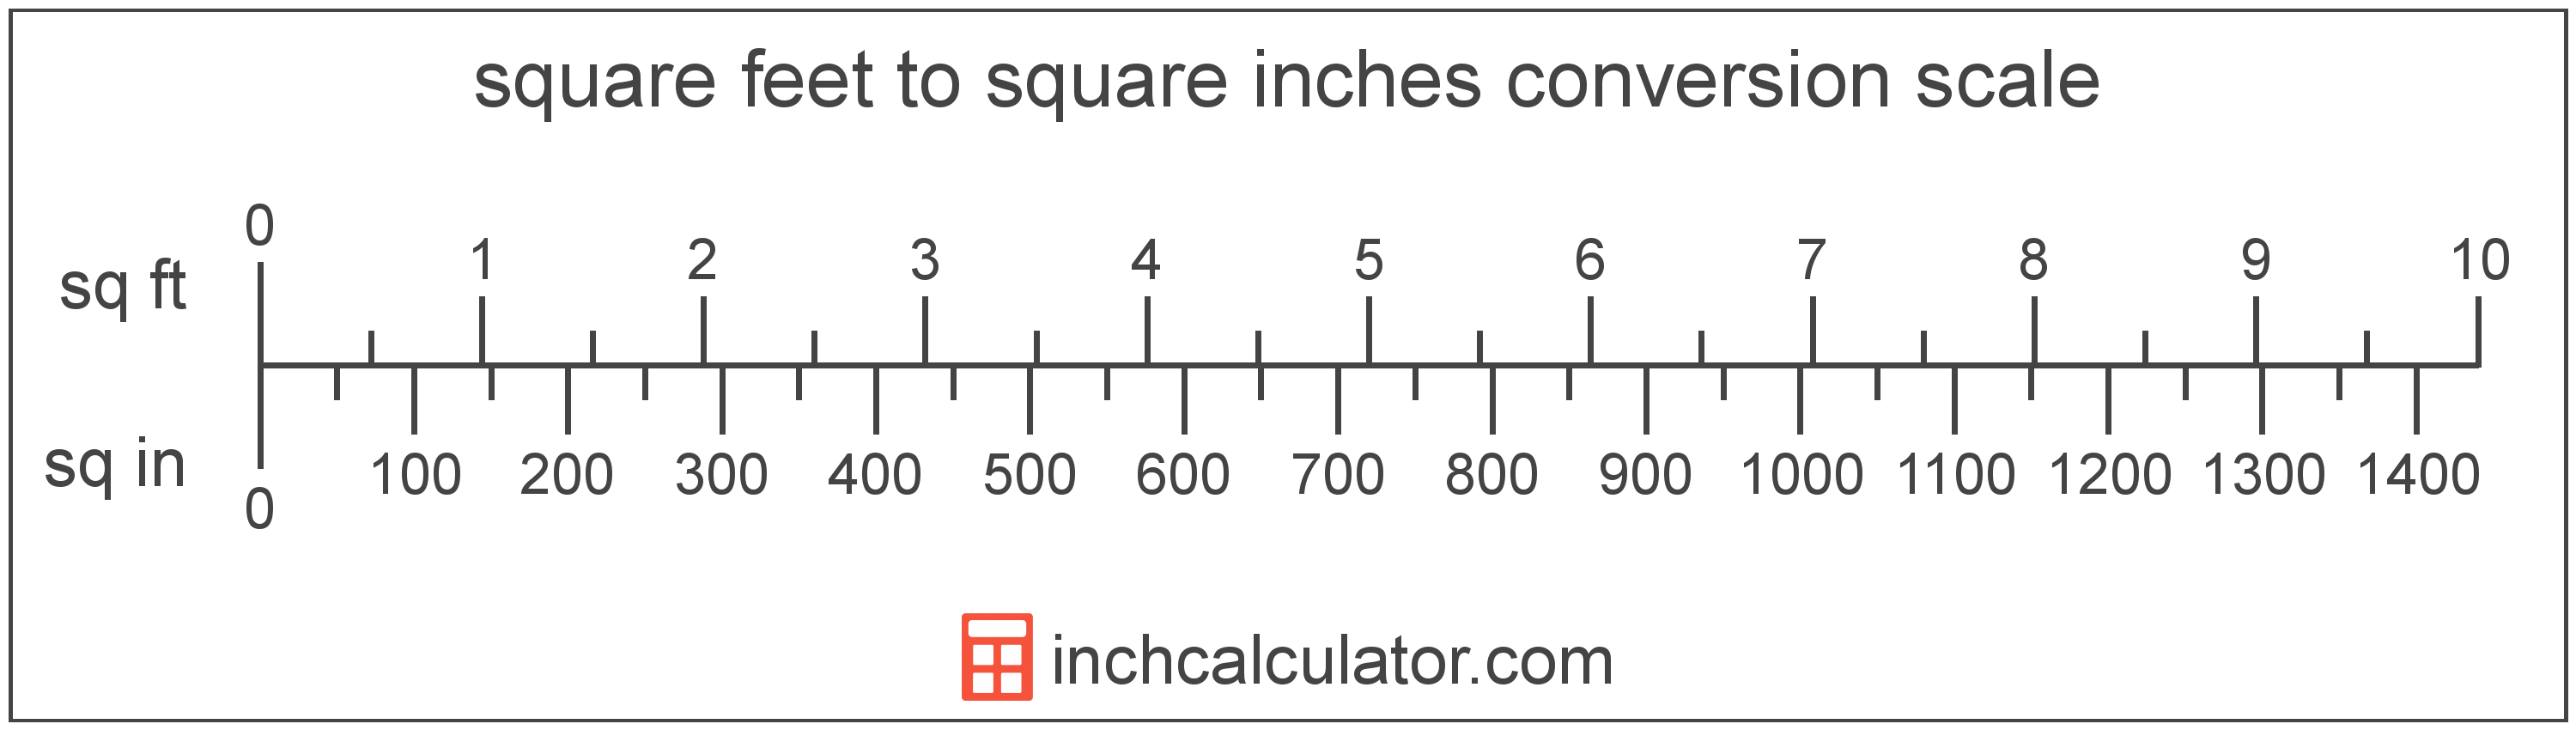 how do i convert square inches into square feet